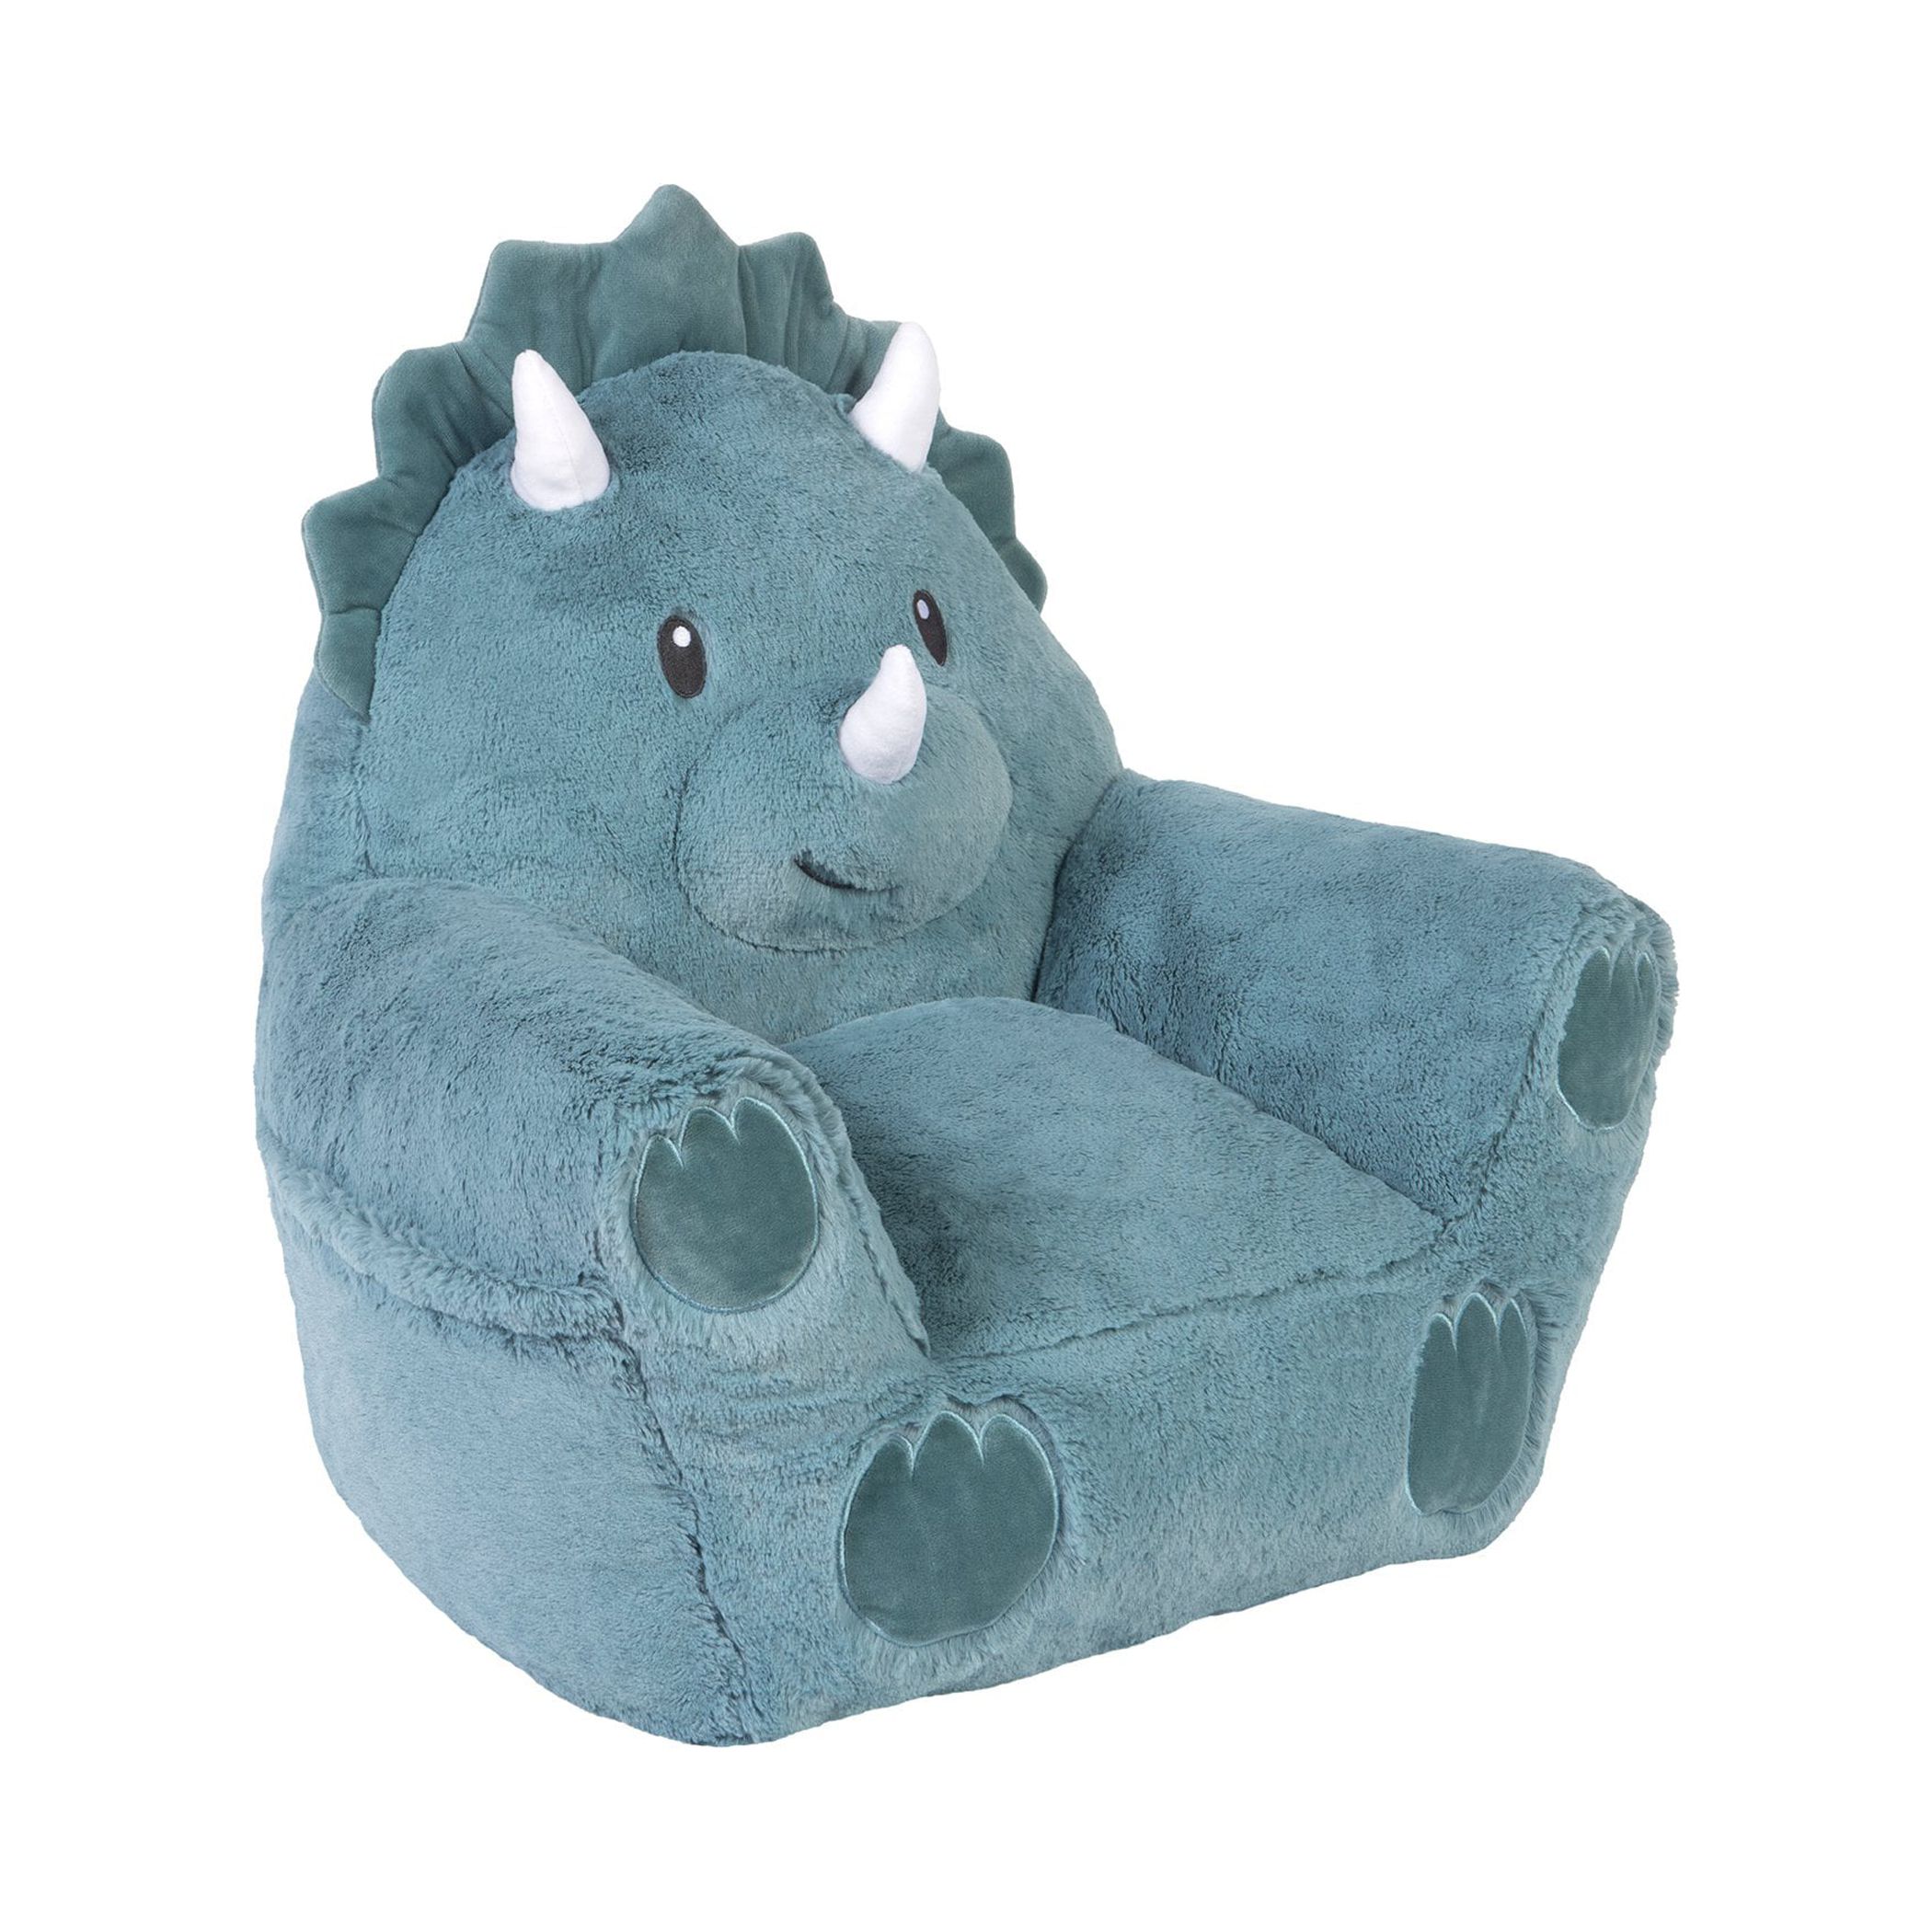 Cuddo Buddies® Unisex Toddler Dinosaur Plush Character Chair by Trend Lab - image 2 of 11